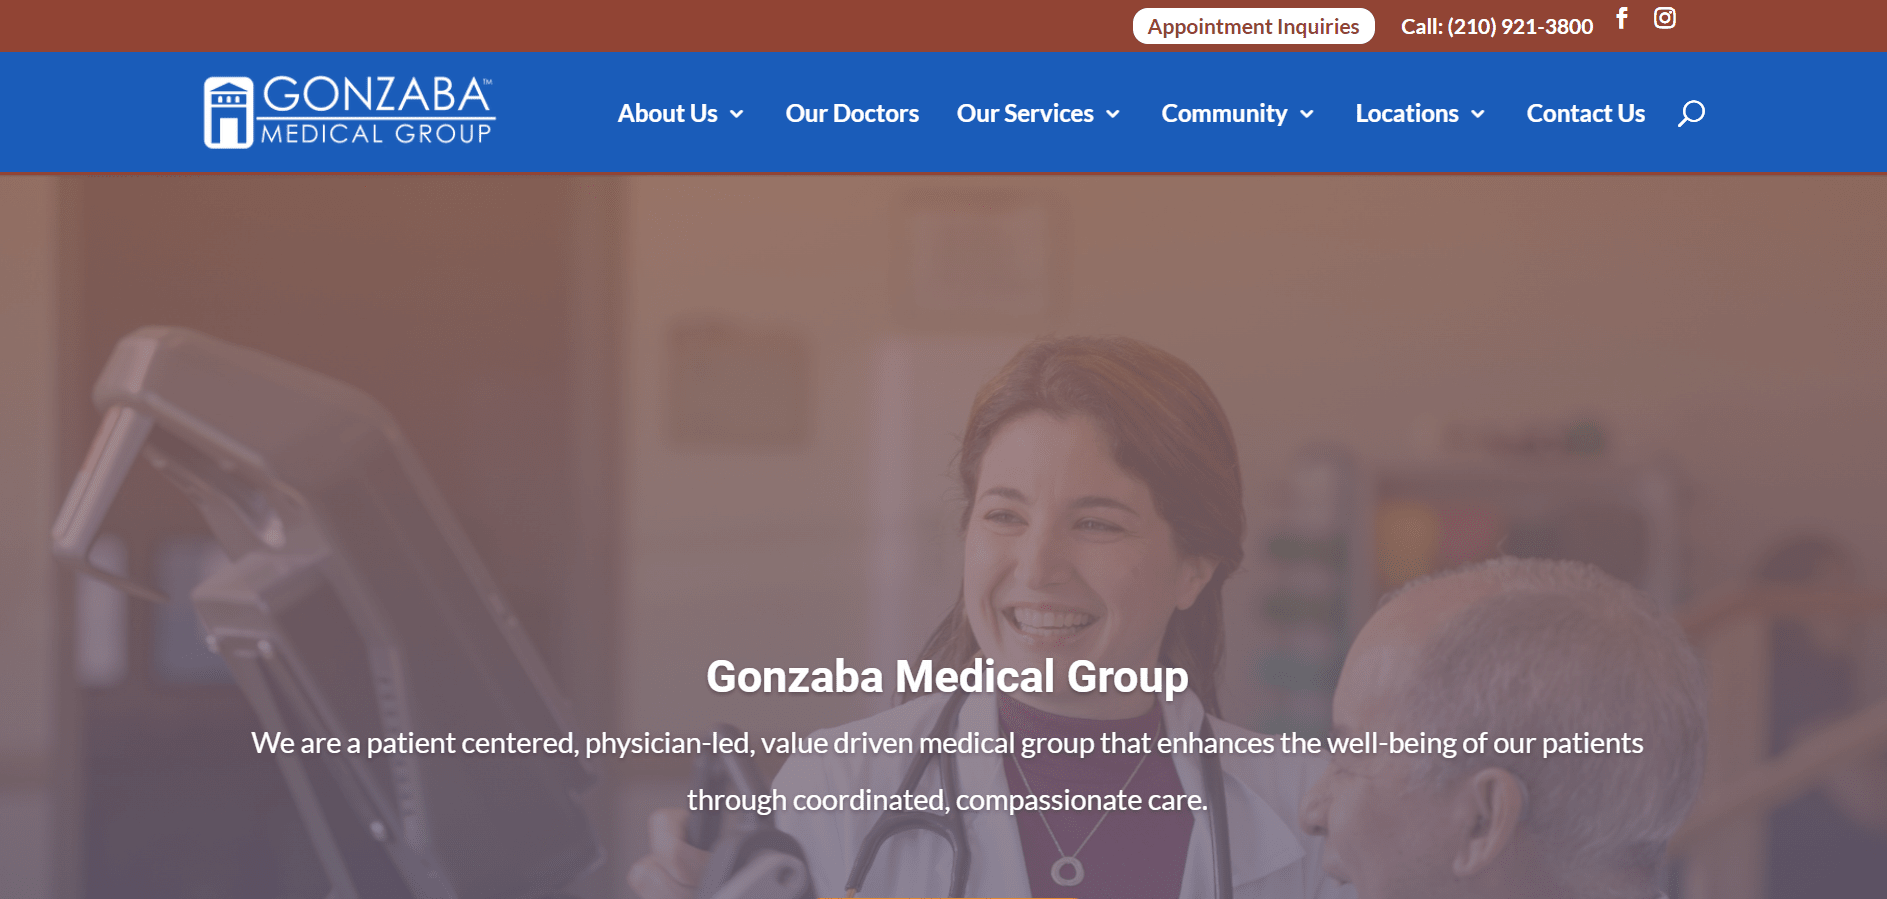 Landing page of Gonzaba Medical Group 